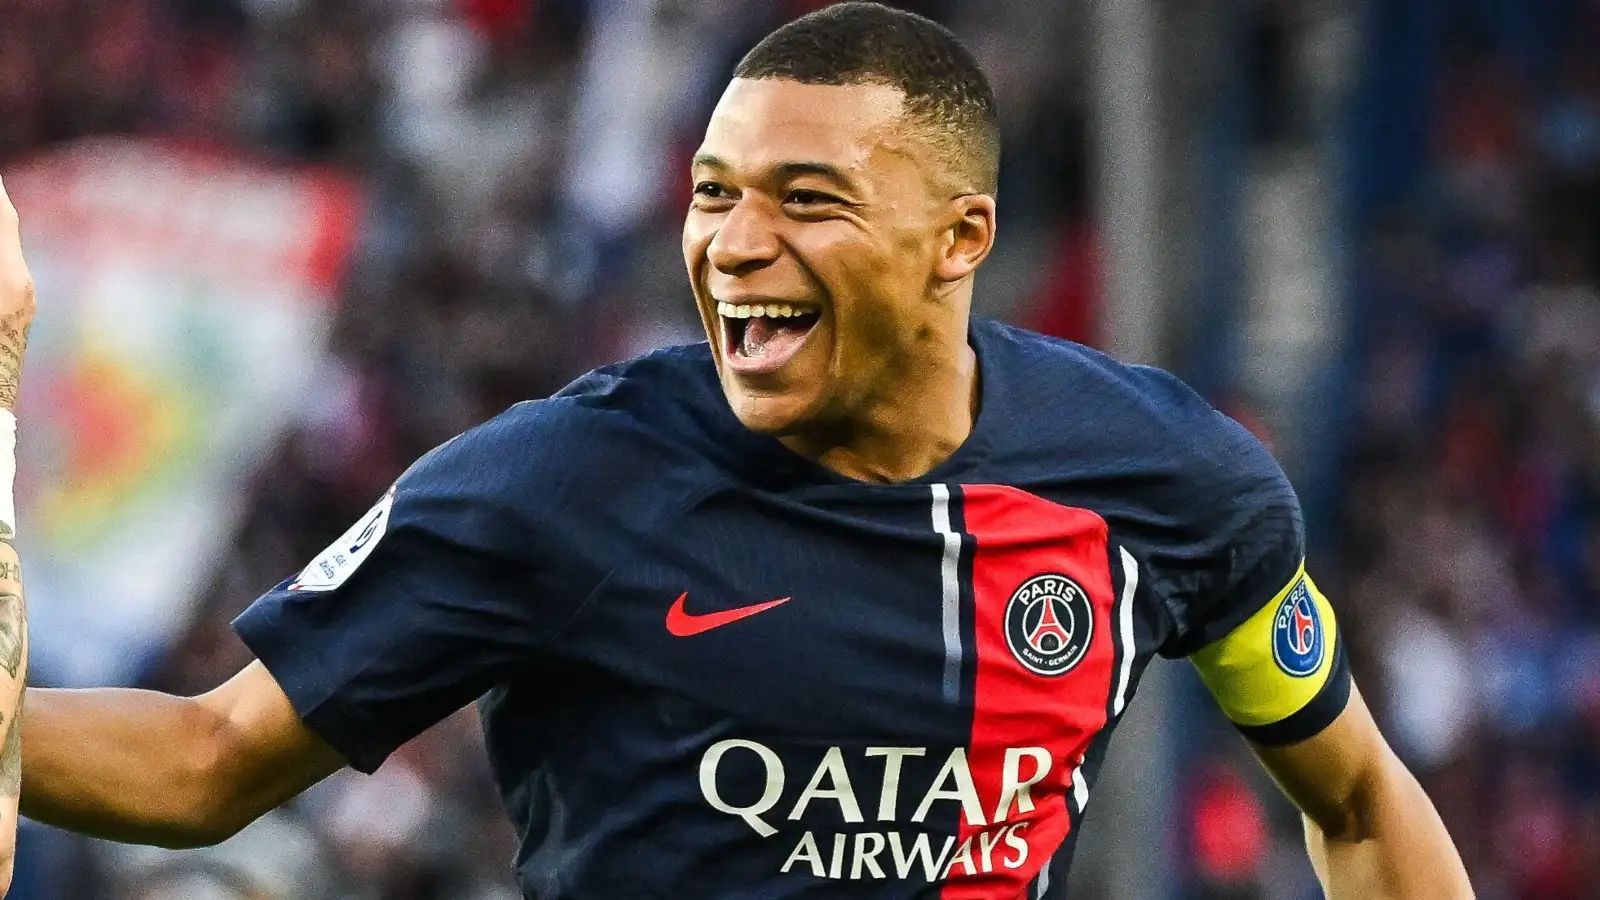 Kylian Mbappe asks Los Blancos stars for advice ahead of Real Madrid move